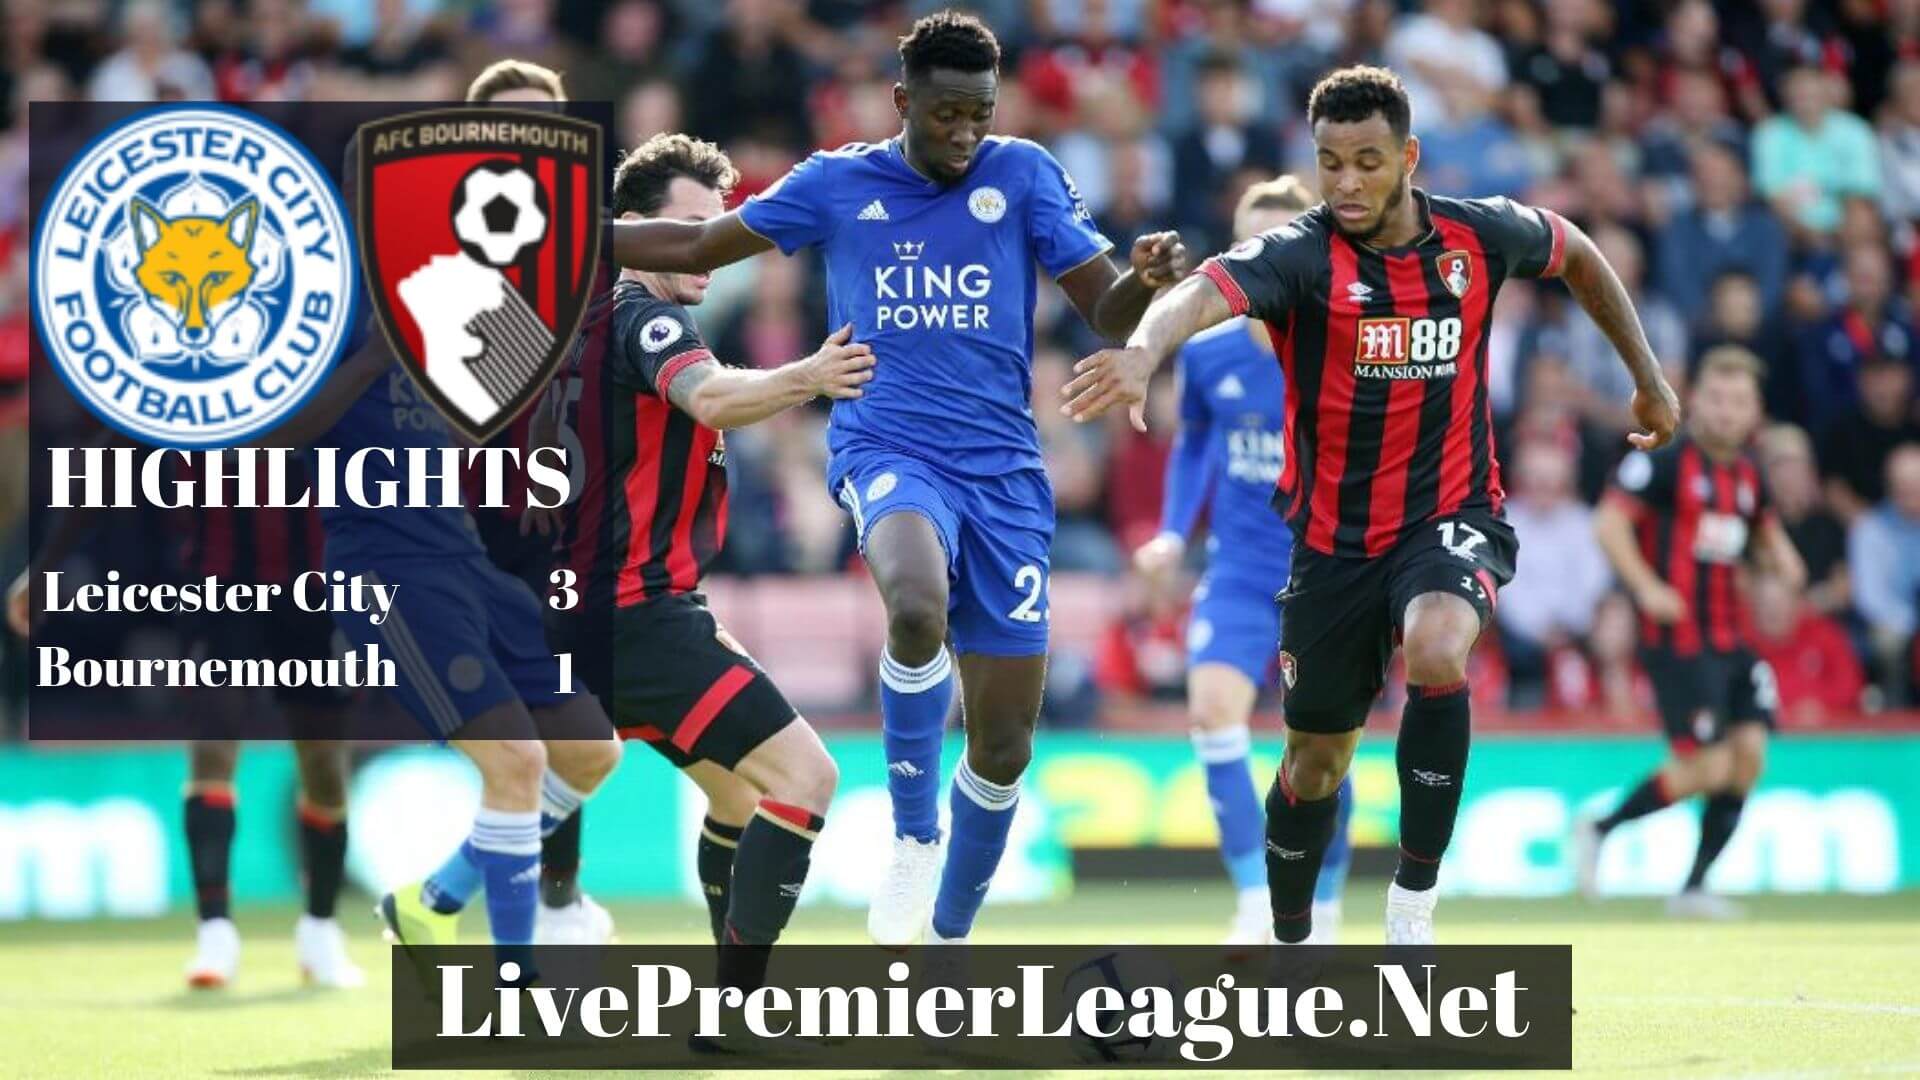 Leicester City Vs Bournemouth highlights 2019 Premier League